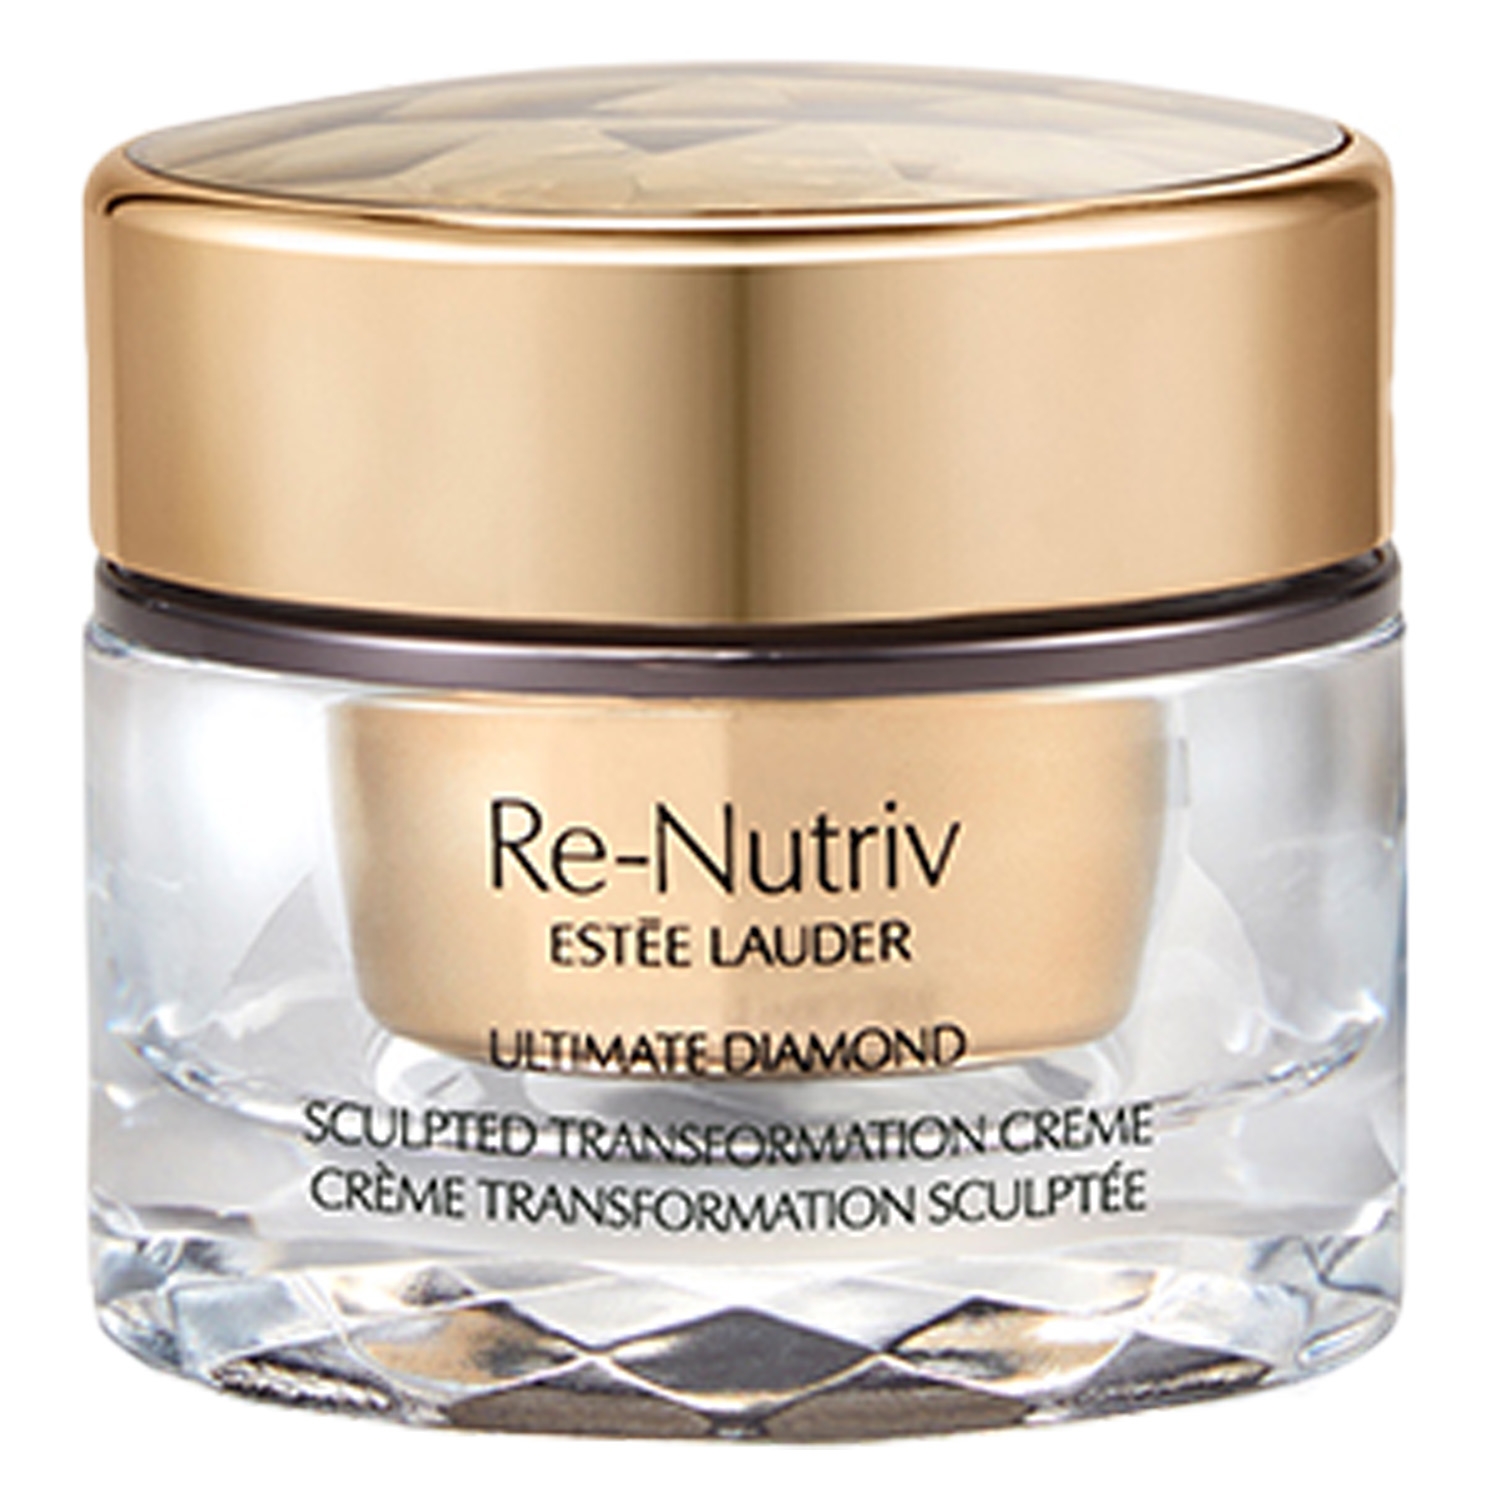 Product image from Re-Nutriv - Ultimate Diamond Sculpted Transformation Cream